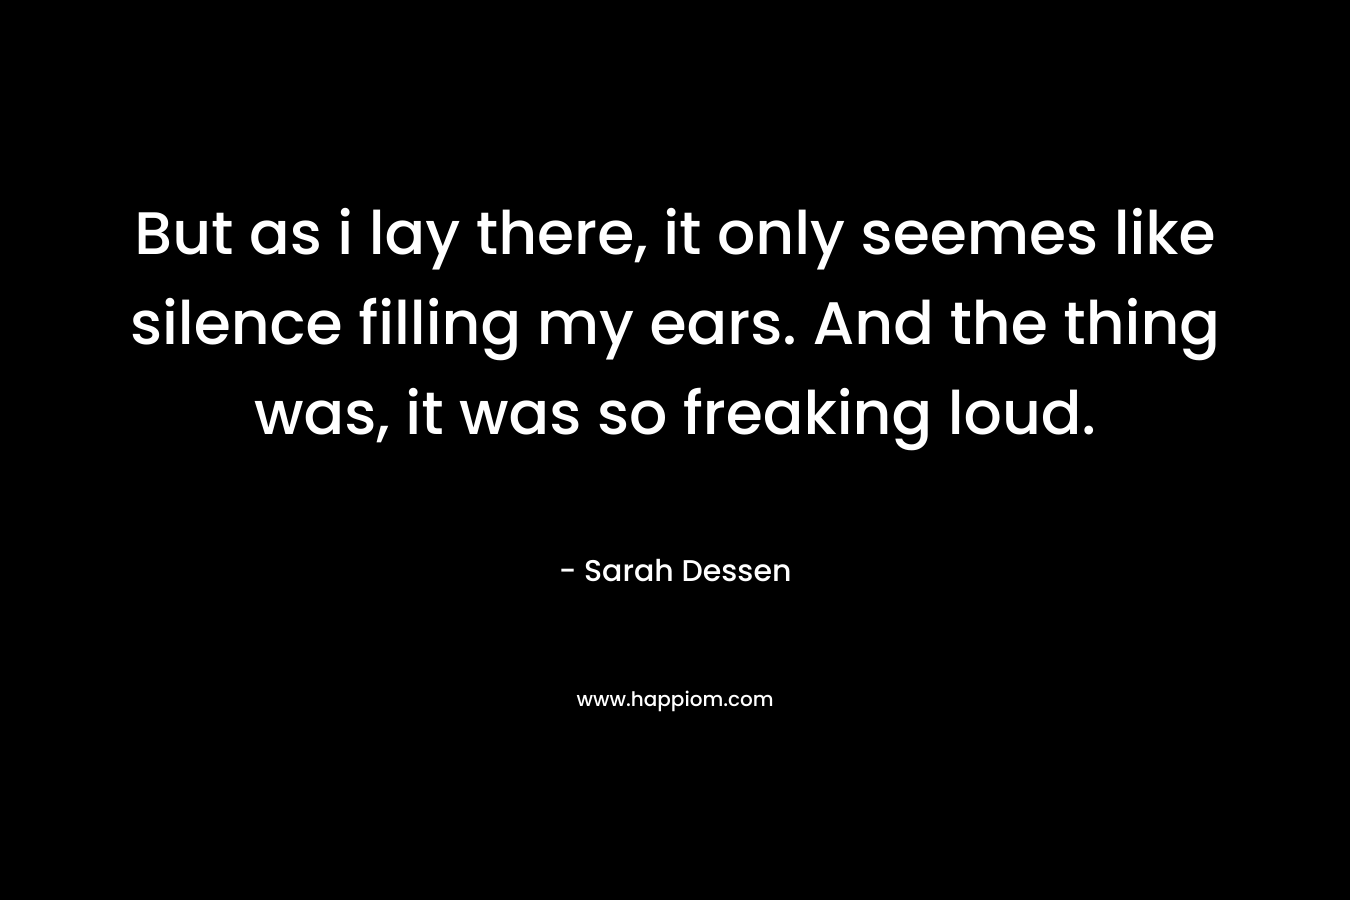 But as i lay there, it only seemes like silence filling my ears. And the thing was, it was so freaking loud. – Sarah Dessen